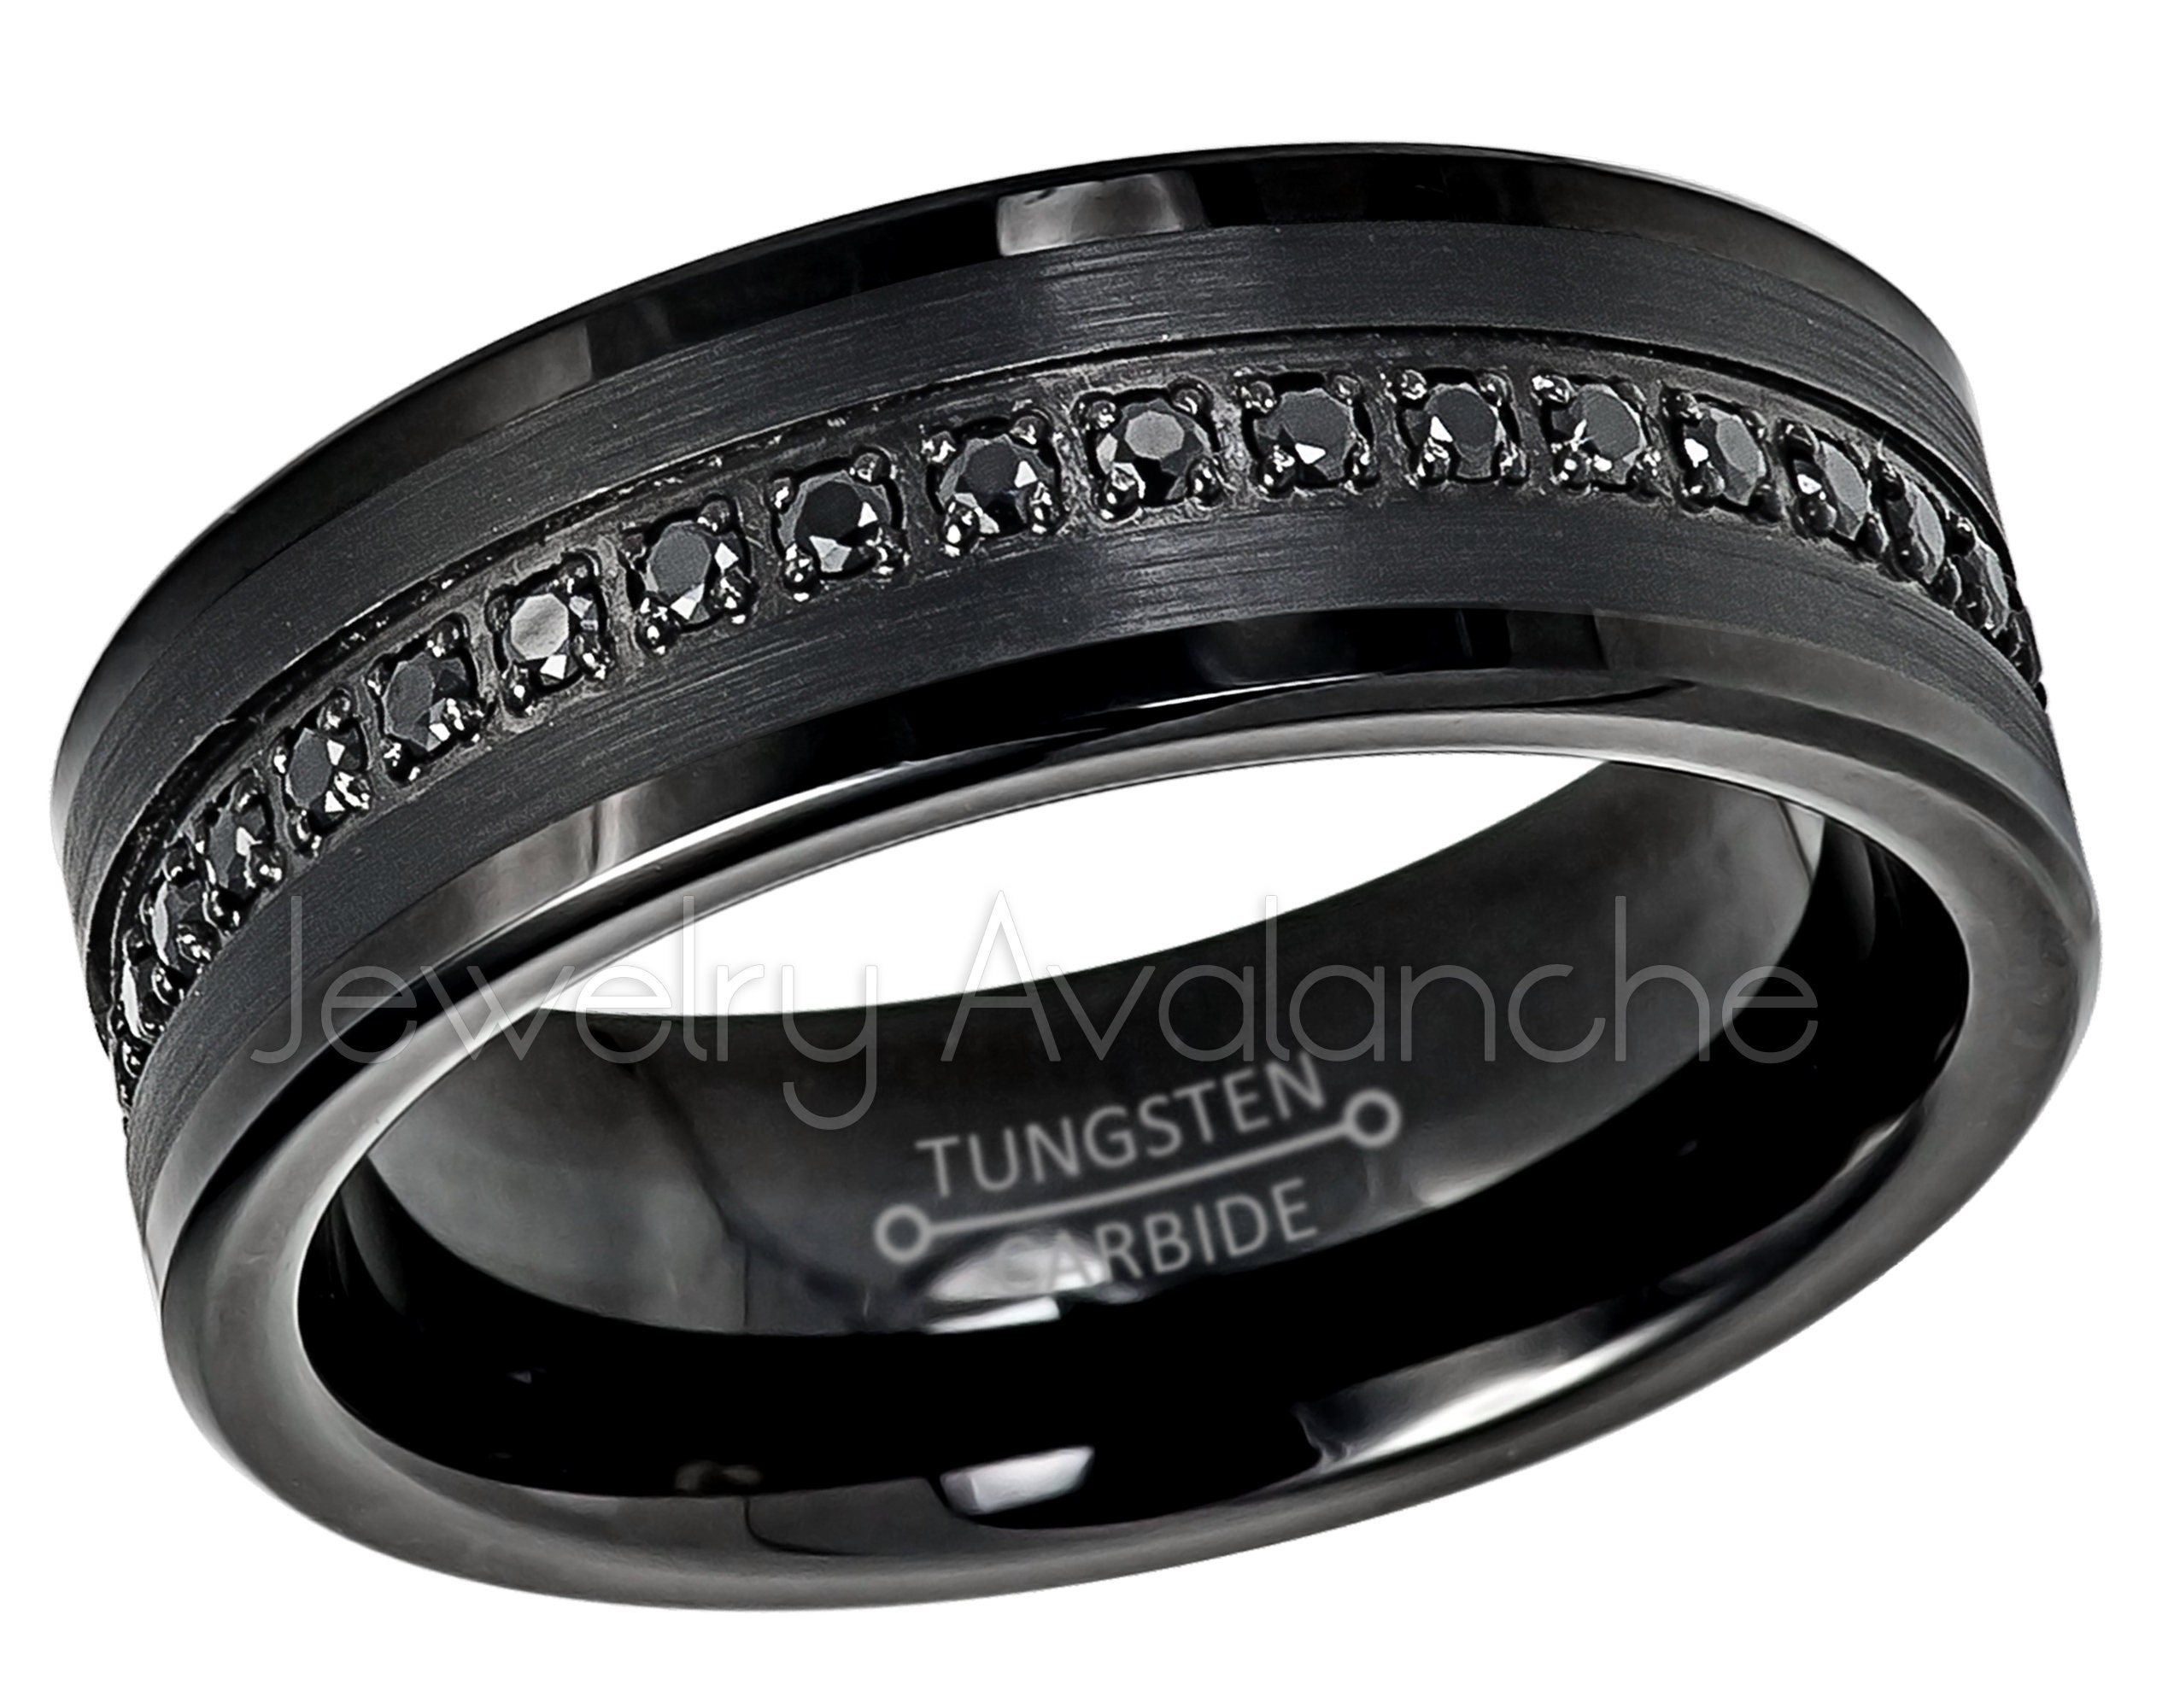 Black Tungsten Carbide Wedding Band With Wood and Arrow - Norse Spirit